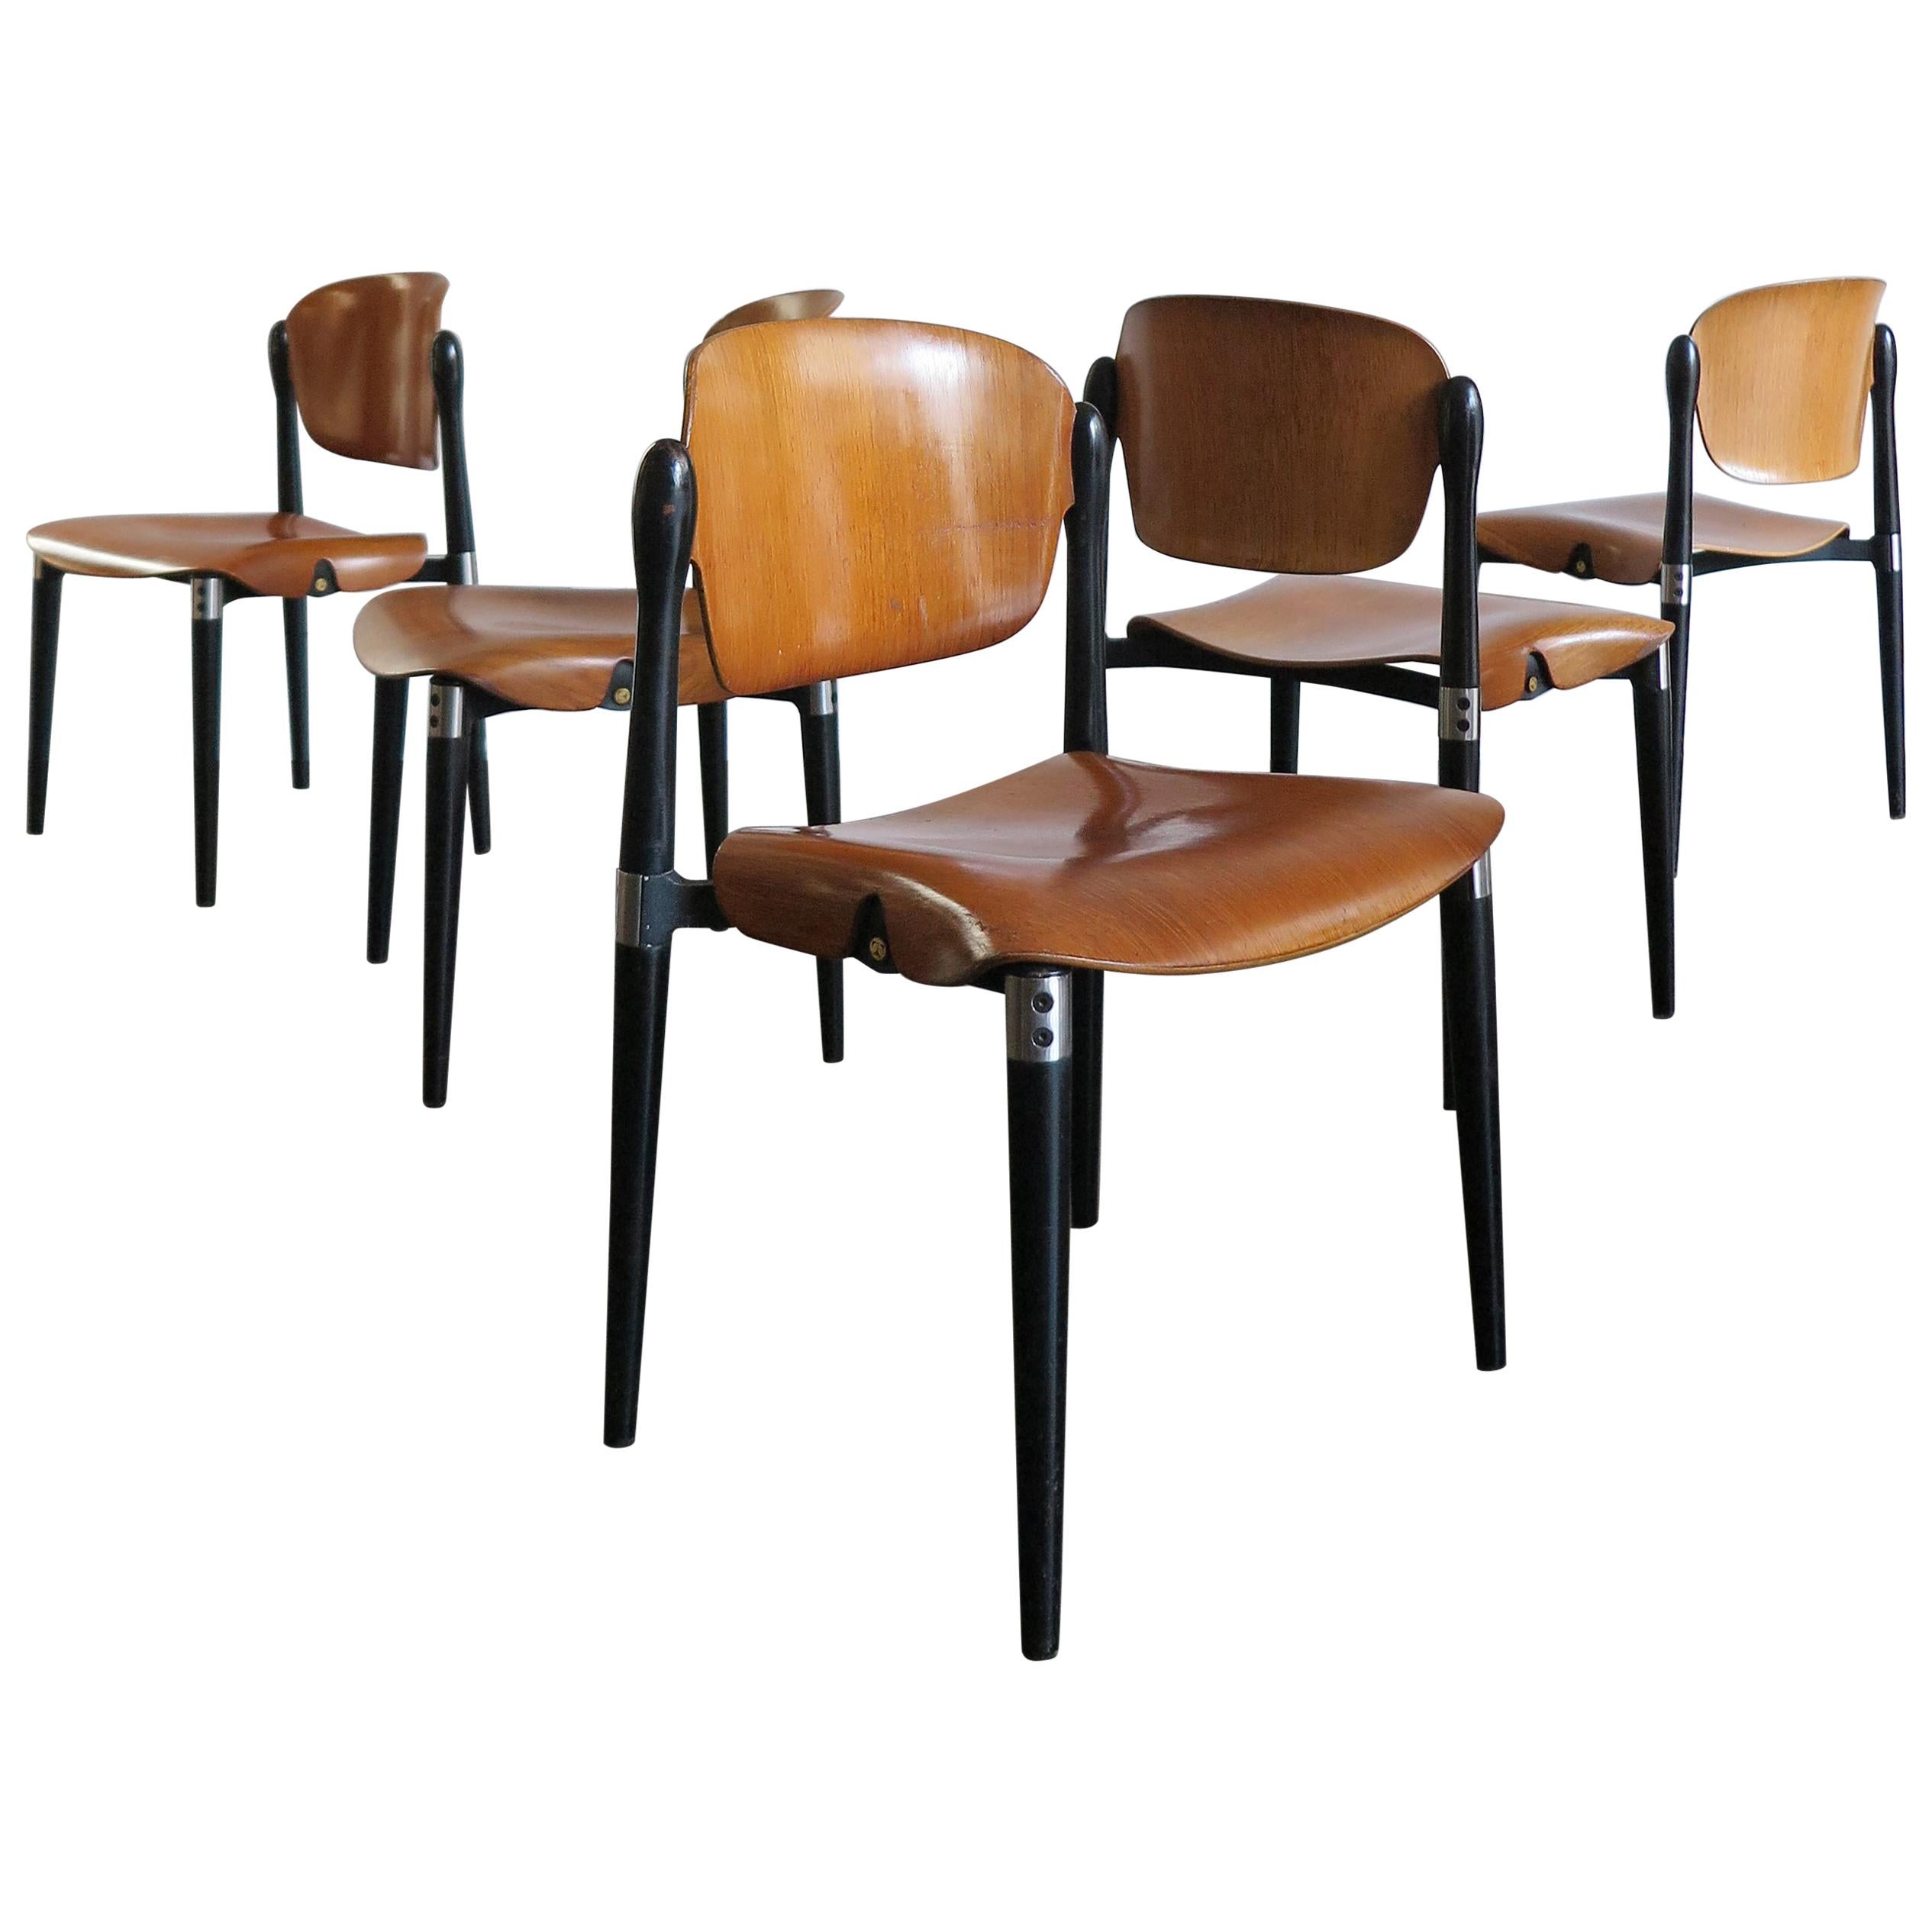 Eugenio Gerli for Tecno Italian Curved Wood Dining Chairs Model “S832”, 1962